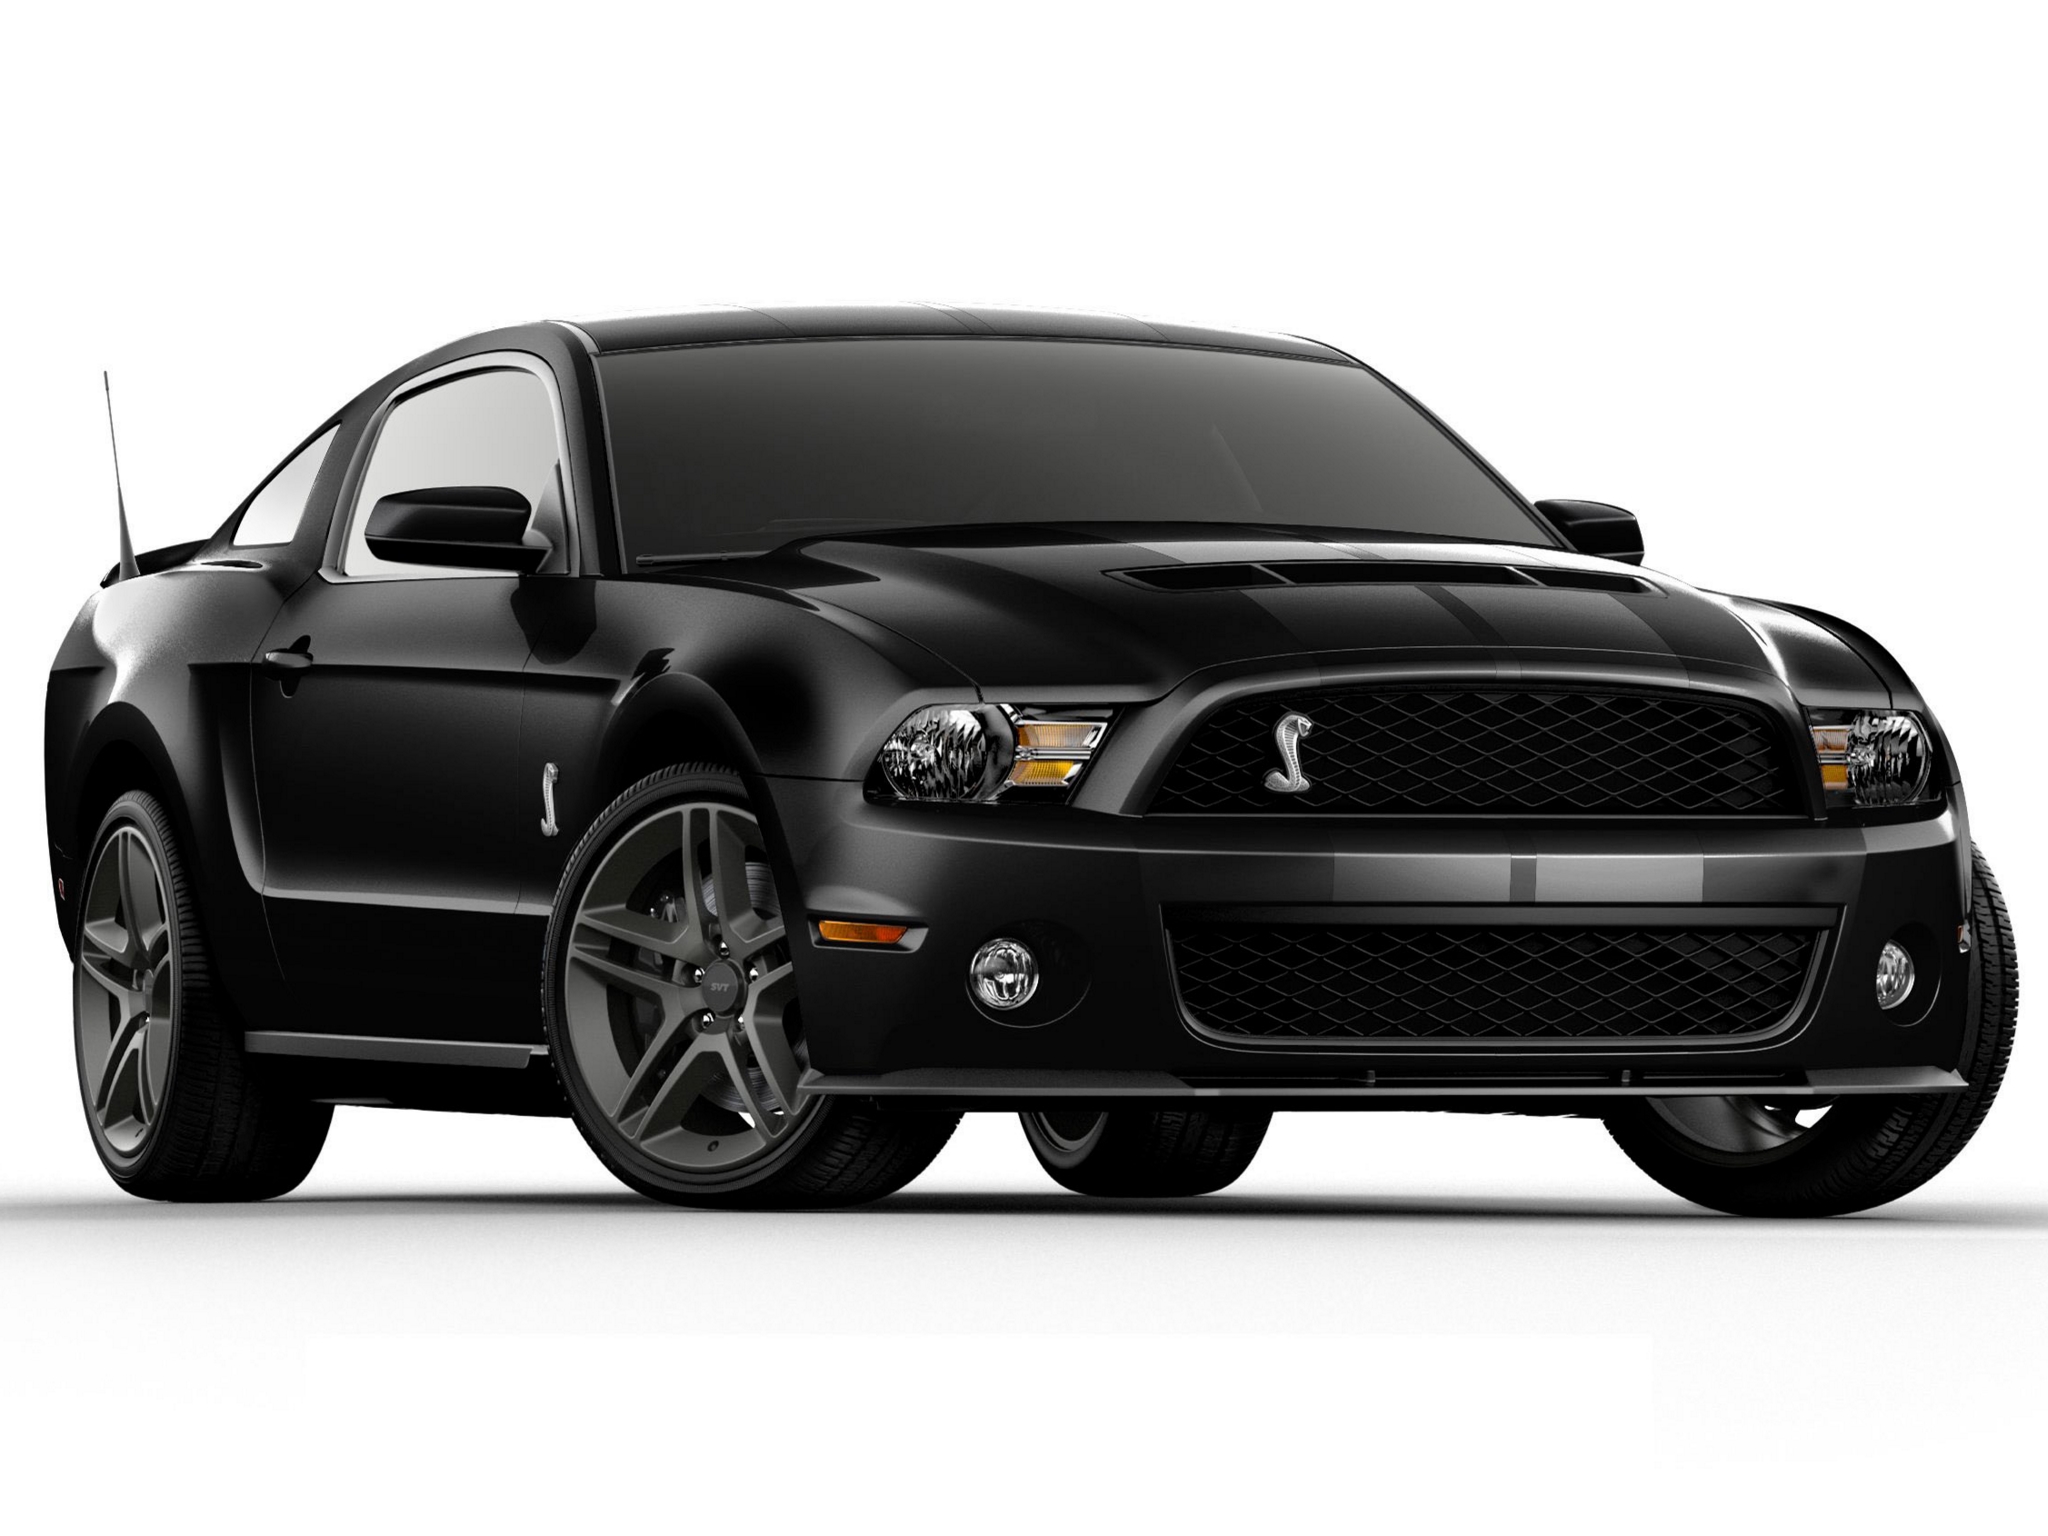 2009, Shelby, Gt500, Ford, Mustang, Muscle Wallpaper